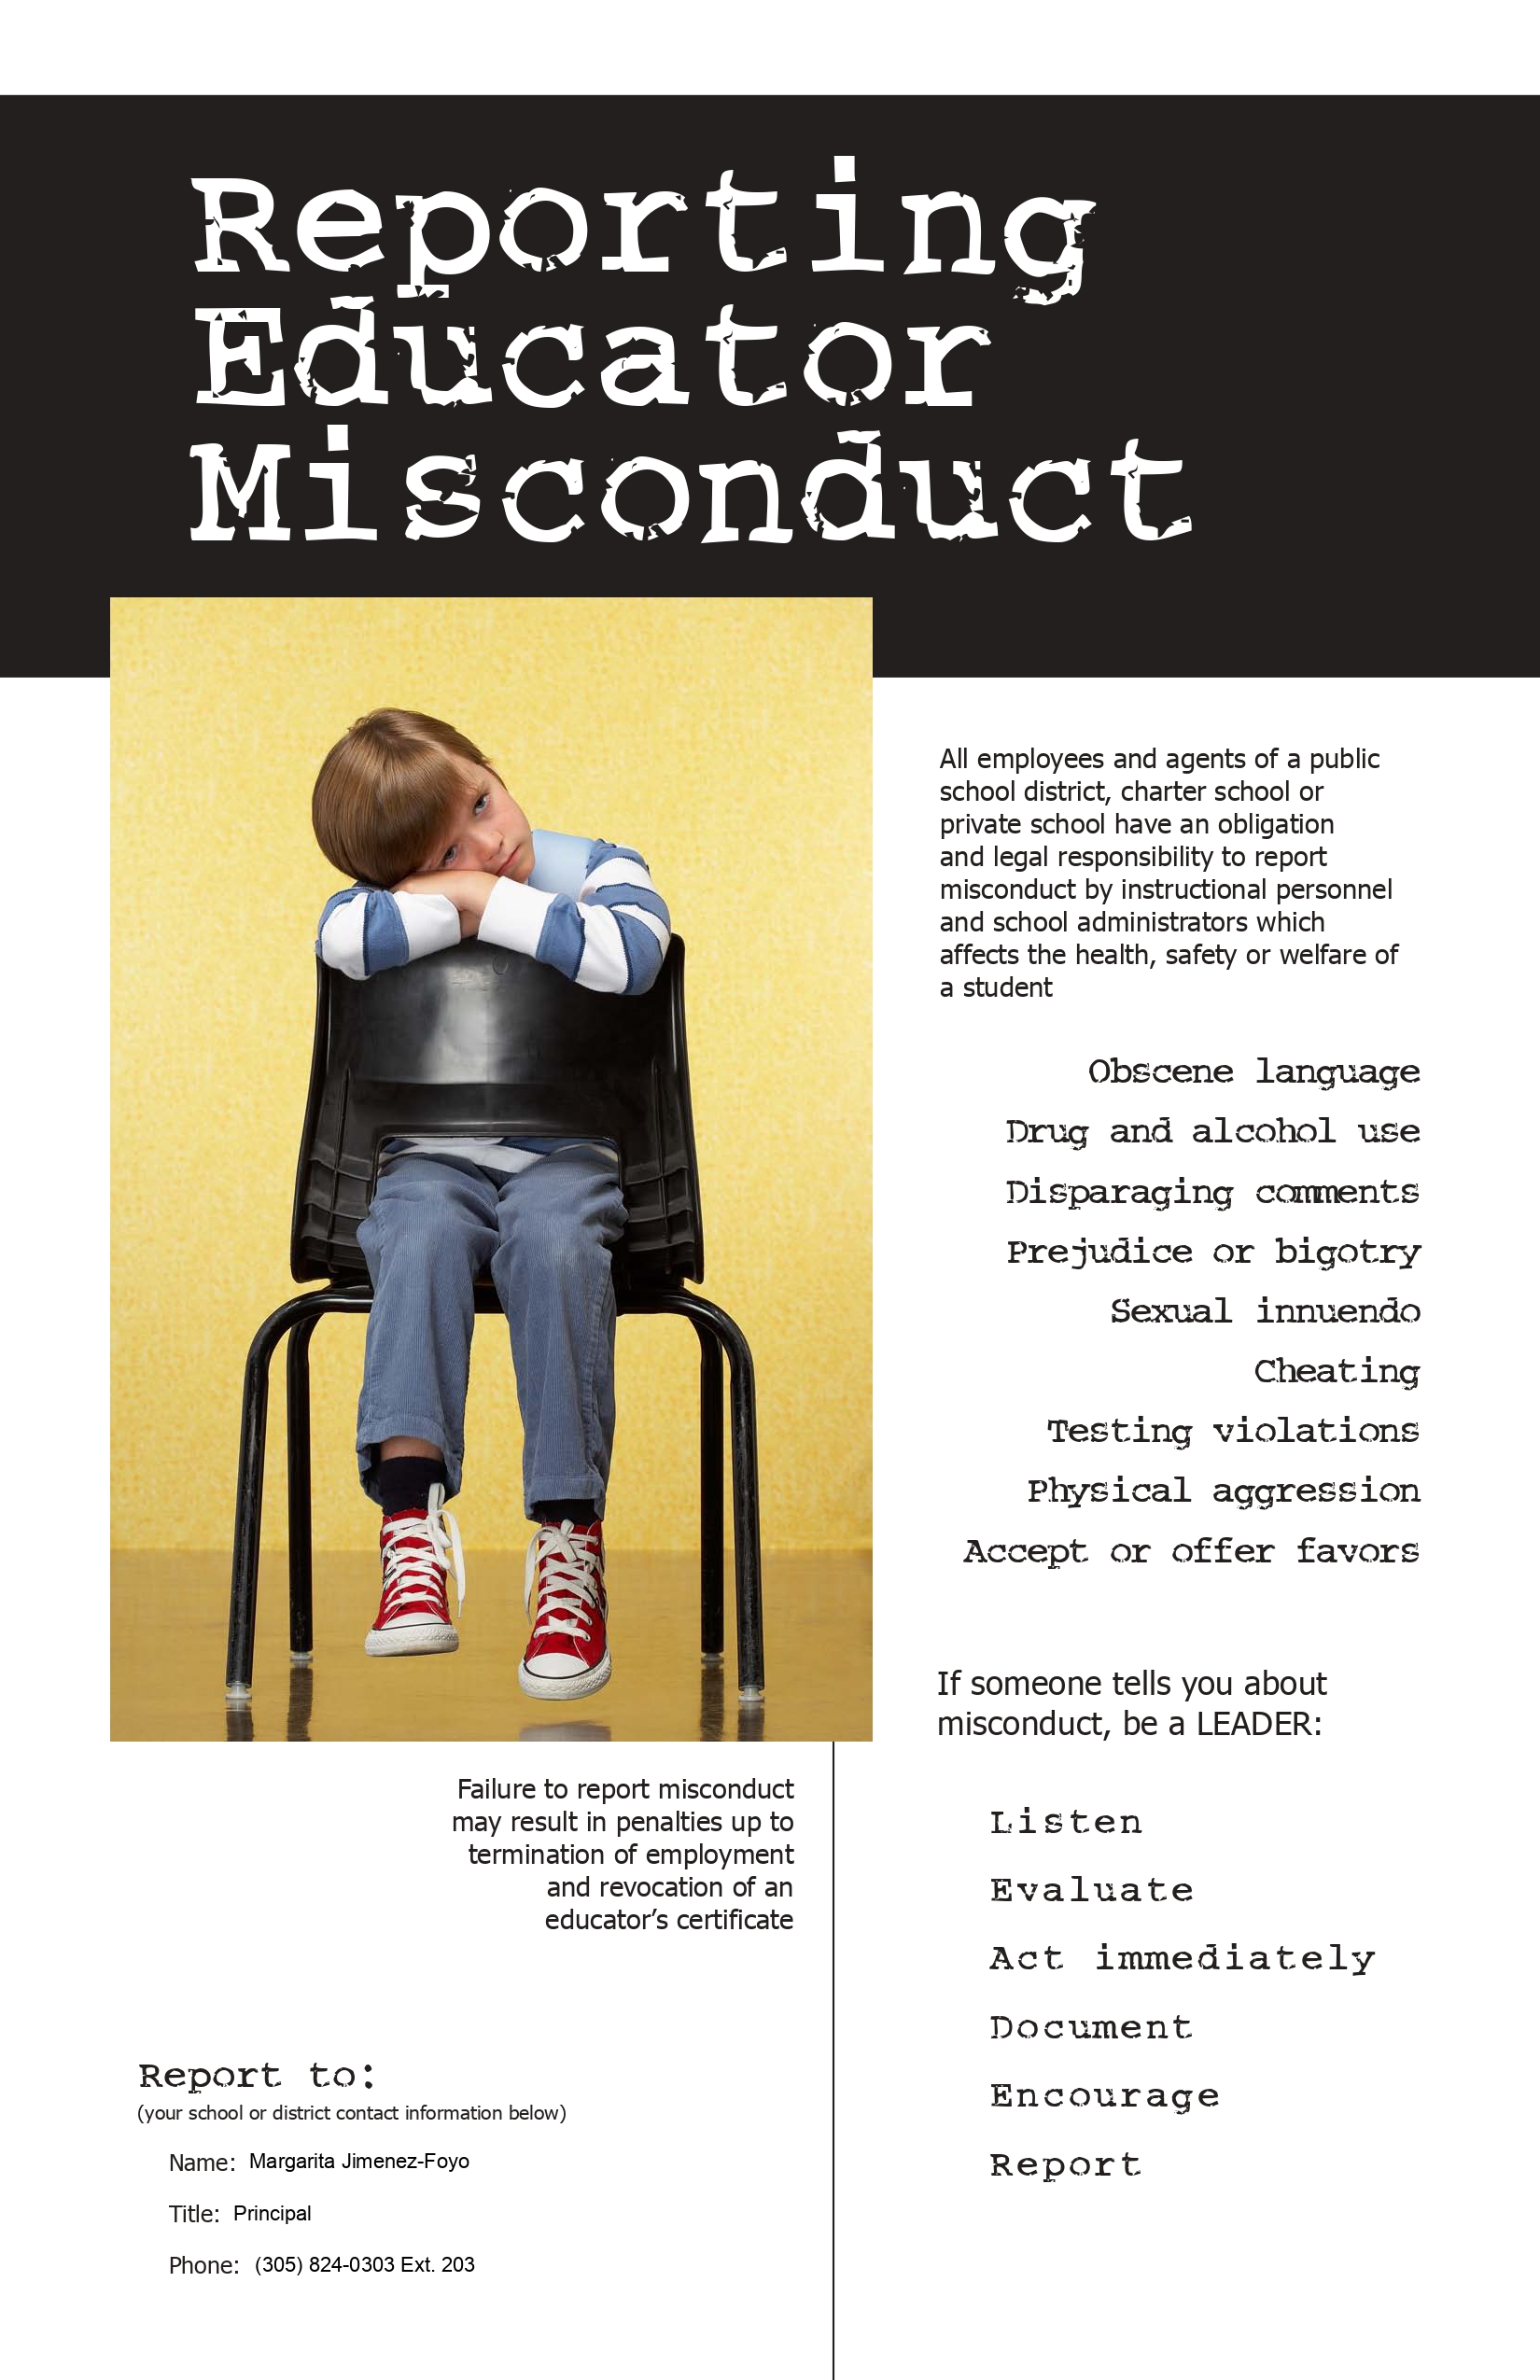 Reporting Educators Miscounduct_page-0001